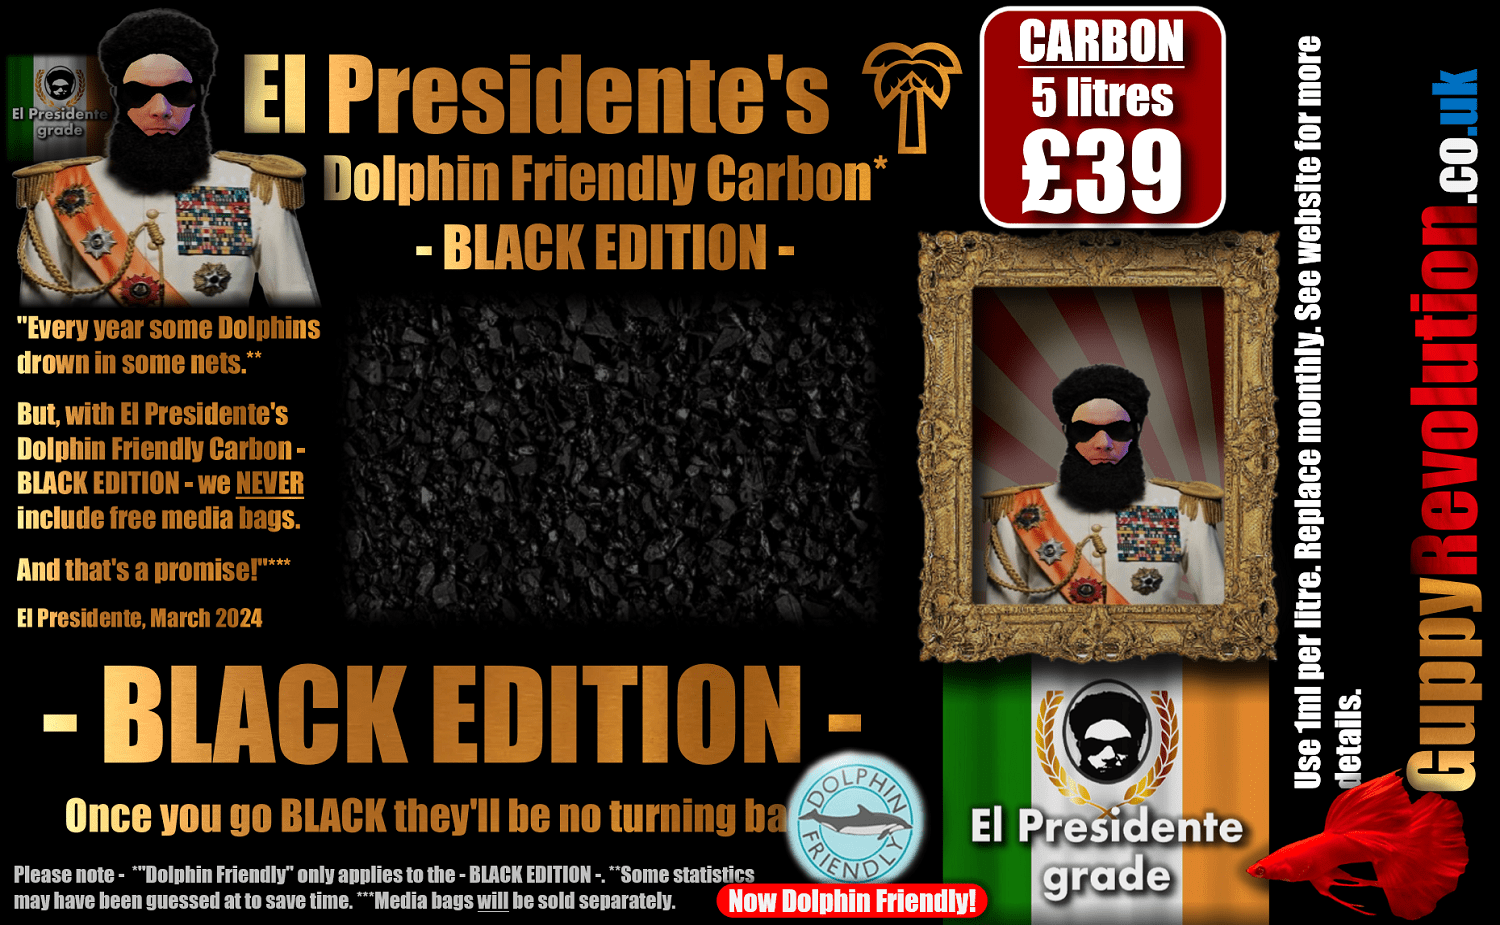 = PRODUCT El Presidente's Dolphin Friendly Carbon - BLACK EDITION - 5 litres £39 1500px x 925px png comp.png